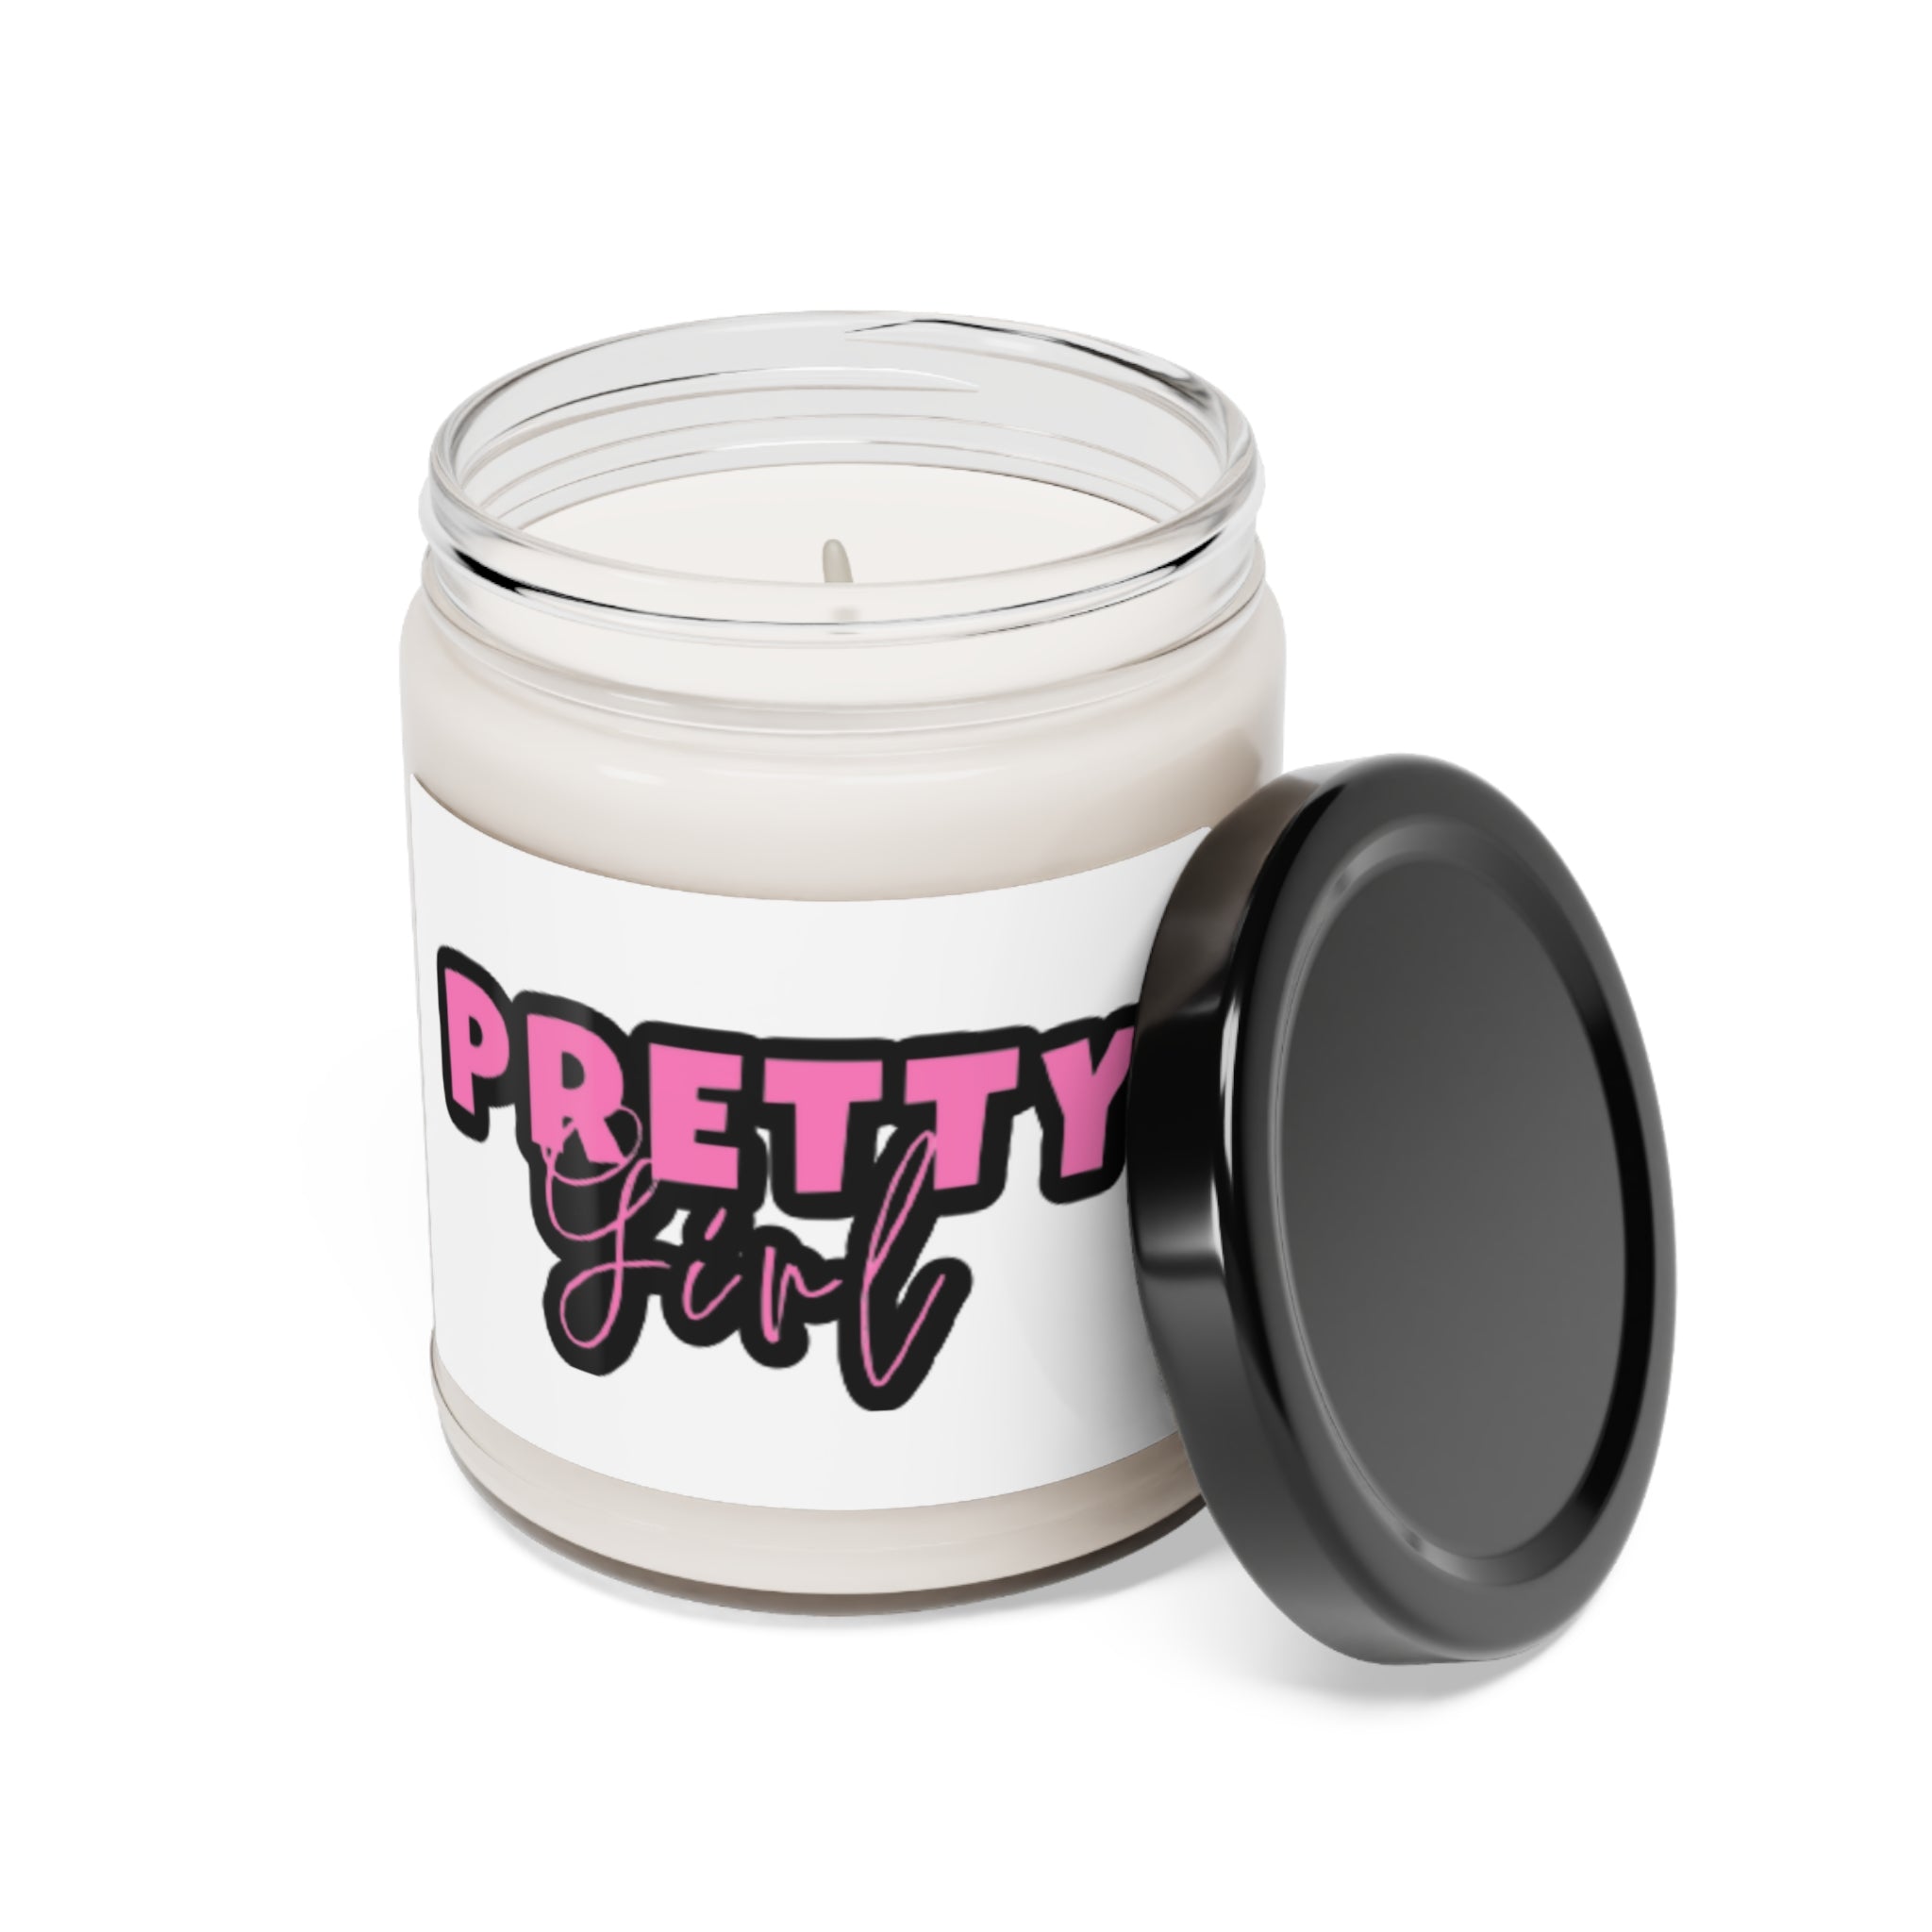 Pretty Girl Classic Logo Scented Soy Candle